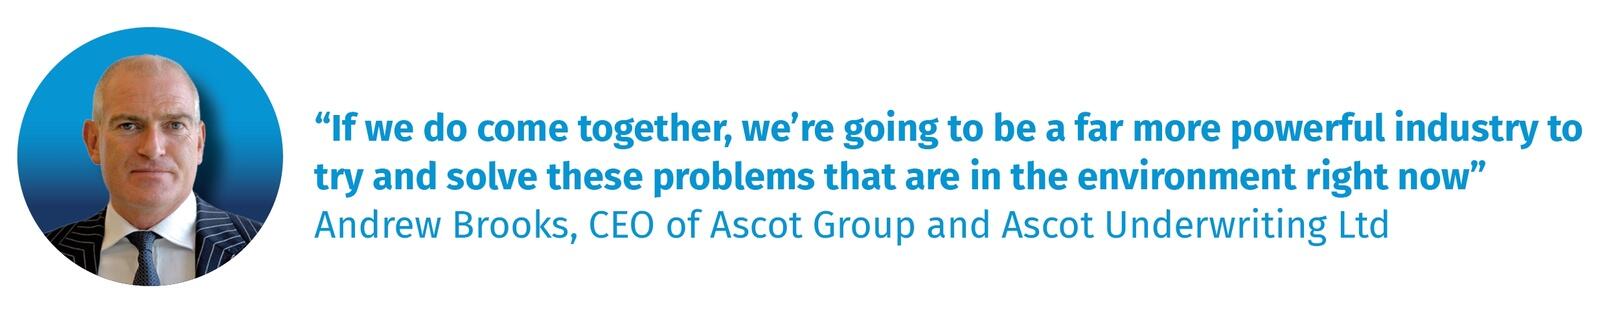 Andrew Brooks, CEO of Ascot Group and Ascot Underwriting Ltd